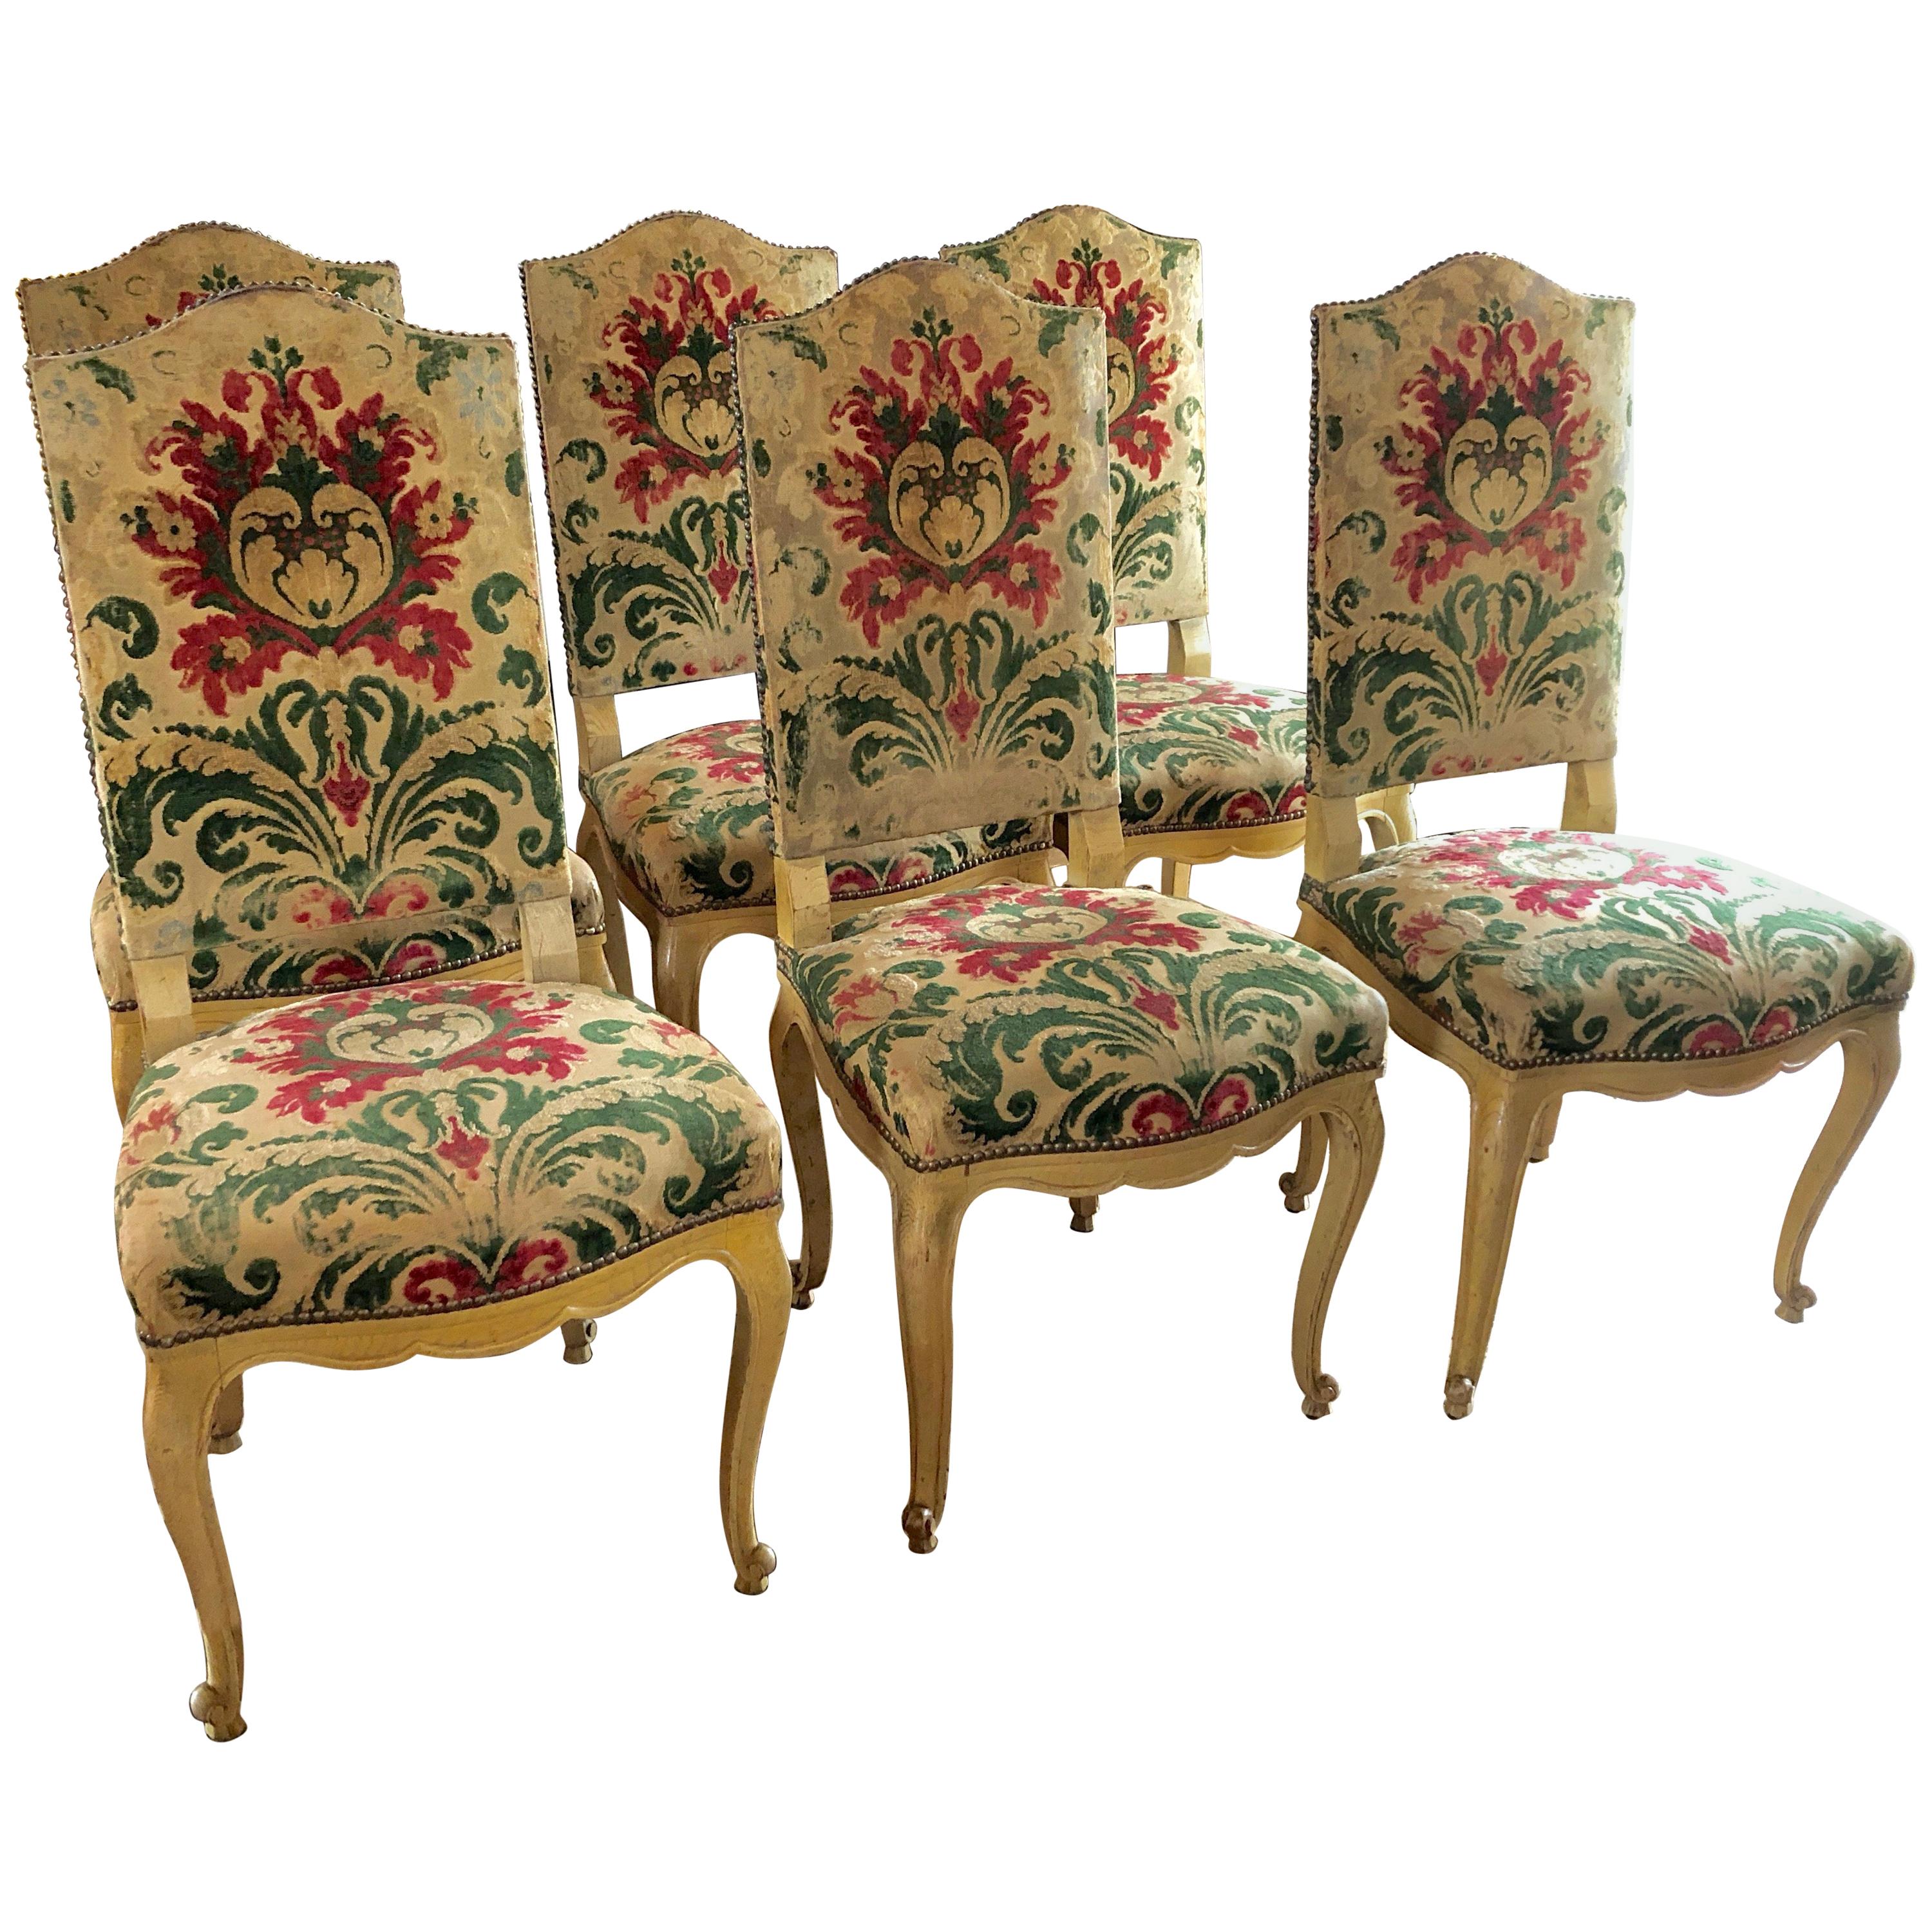 Sumptuous Set of Six Dining Side Chairs with Original Cut Velvet Upholstery